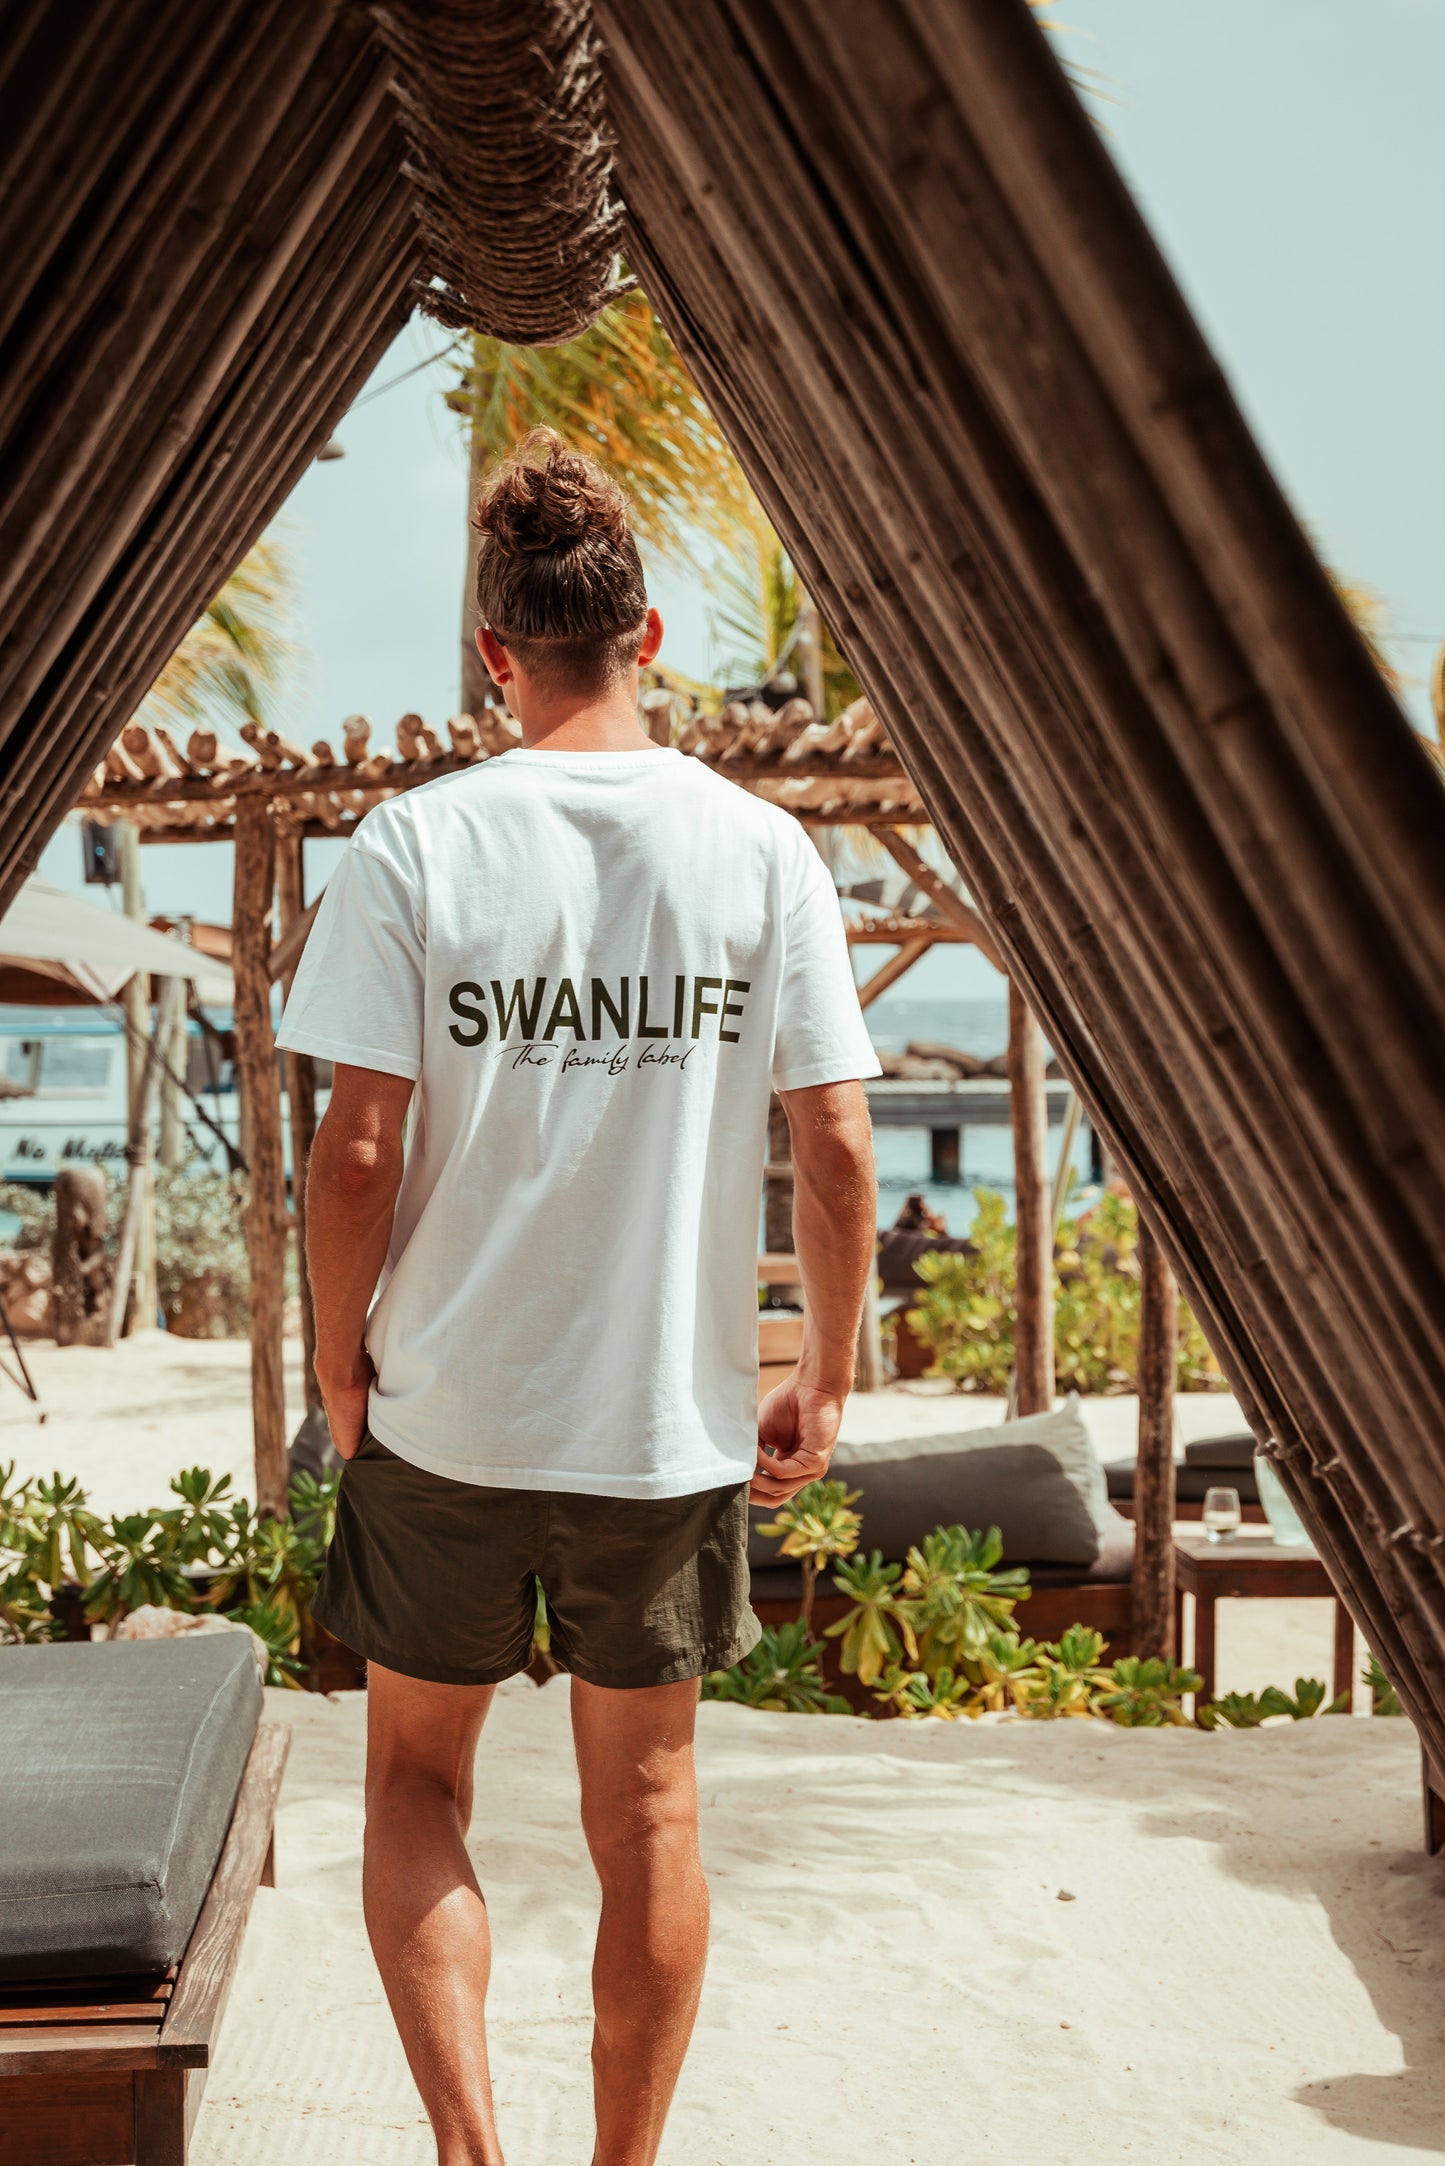 Swanlife Oversized Tee 'The Family Label' - White/Olive - Swanlife Fashion